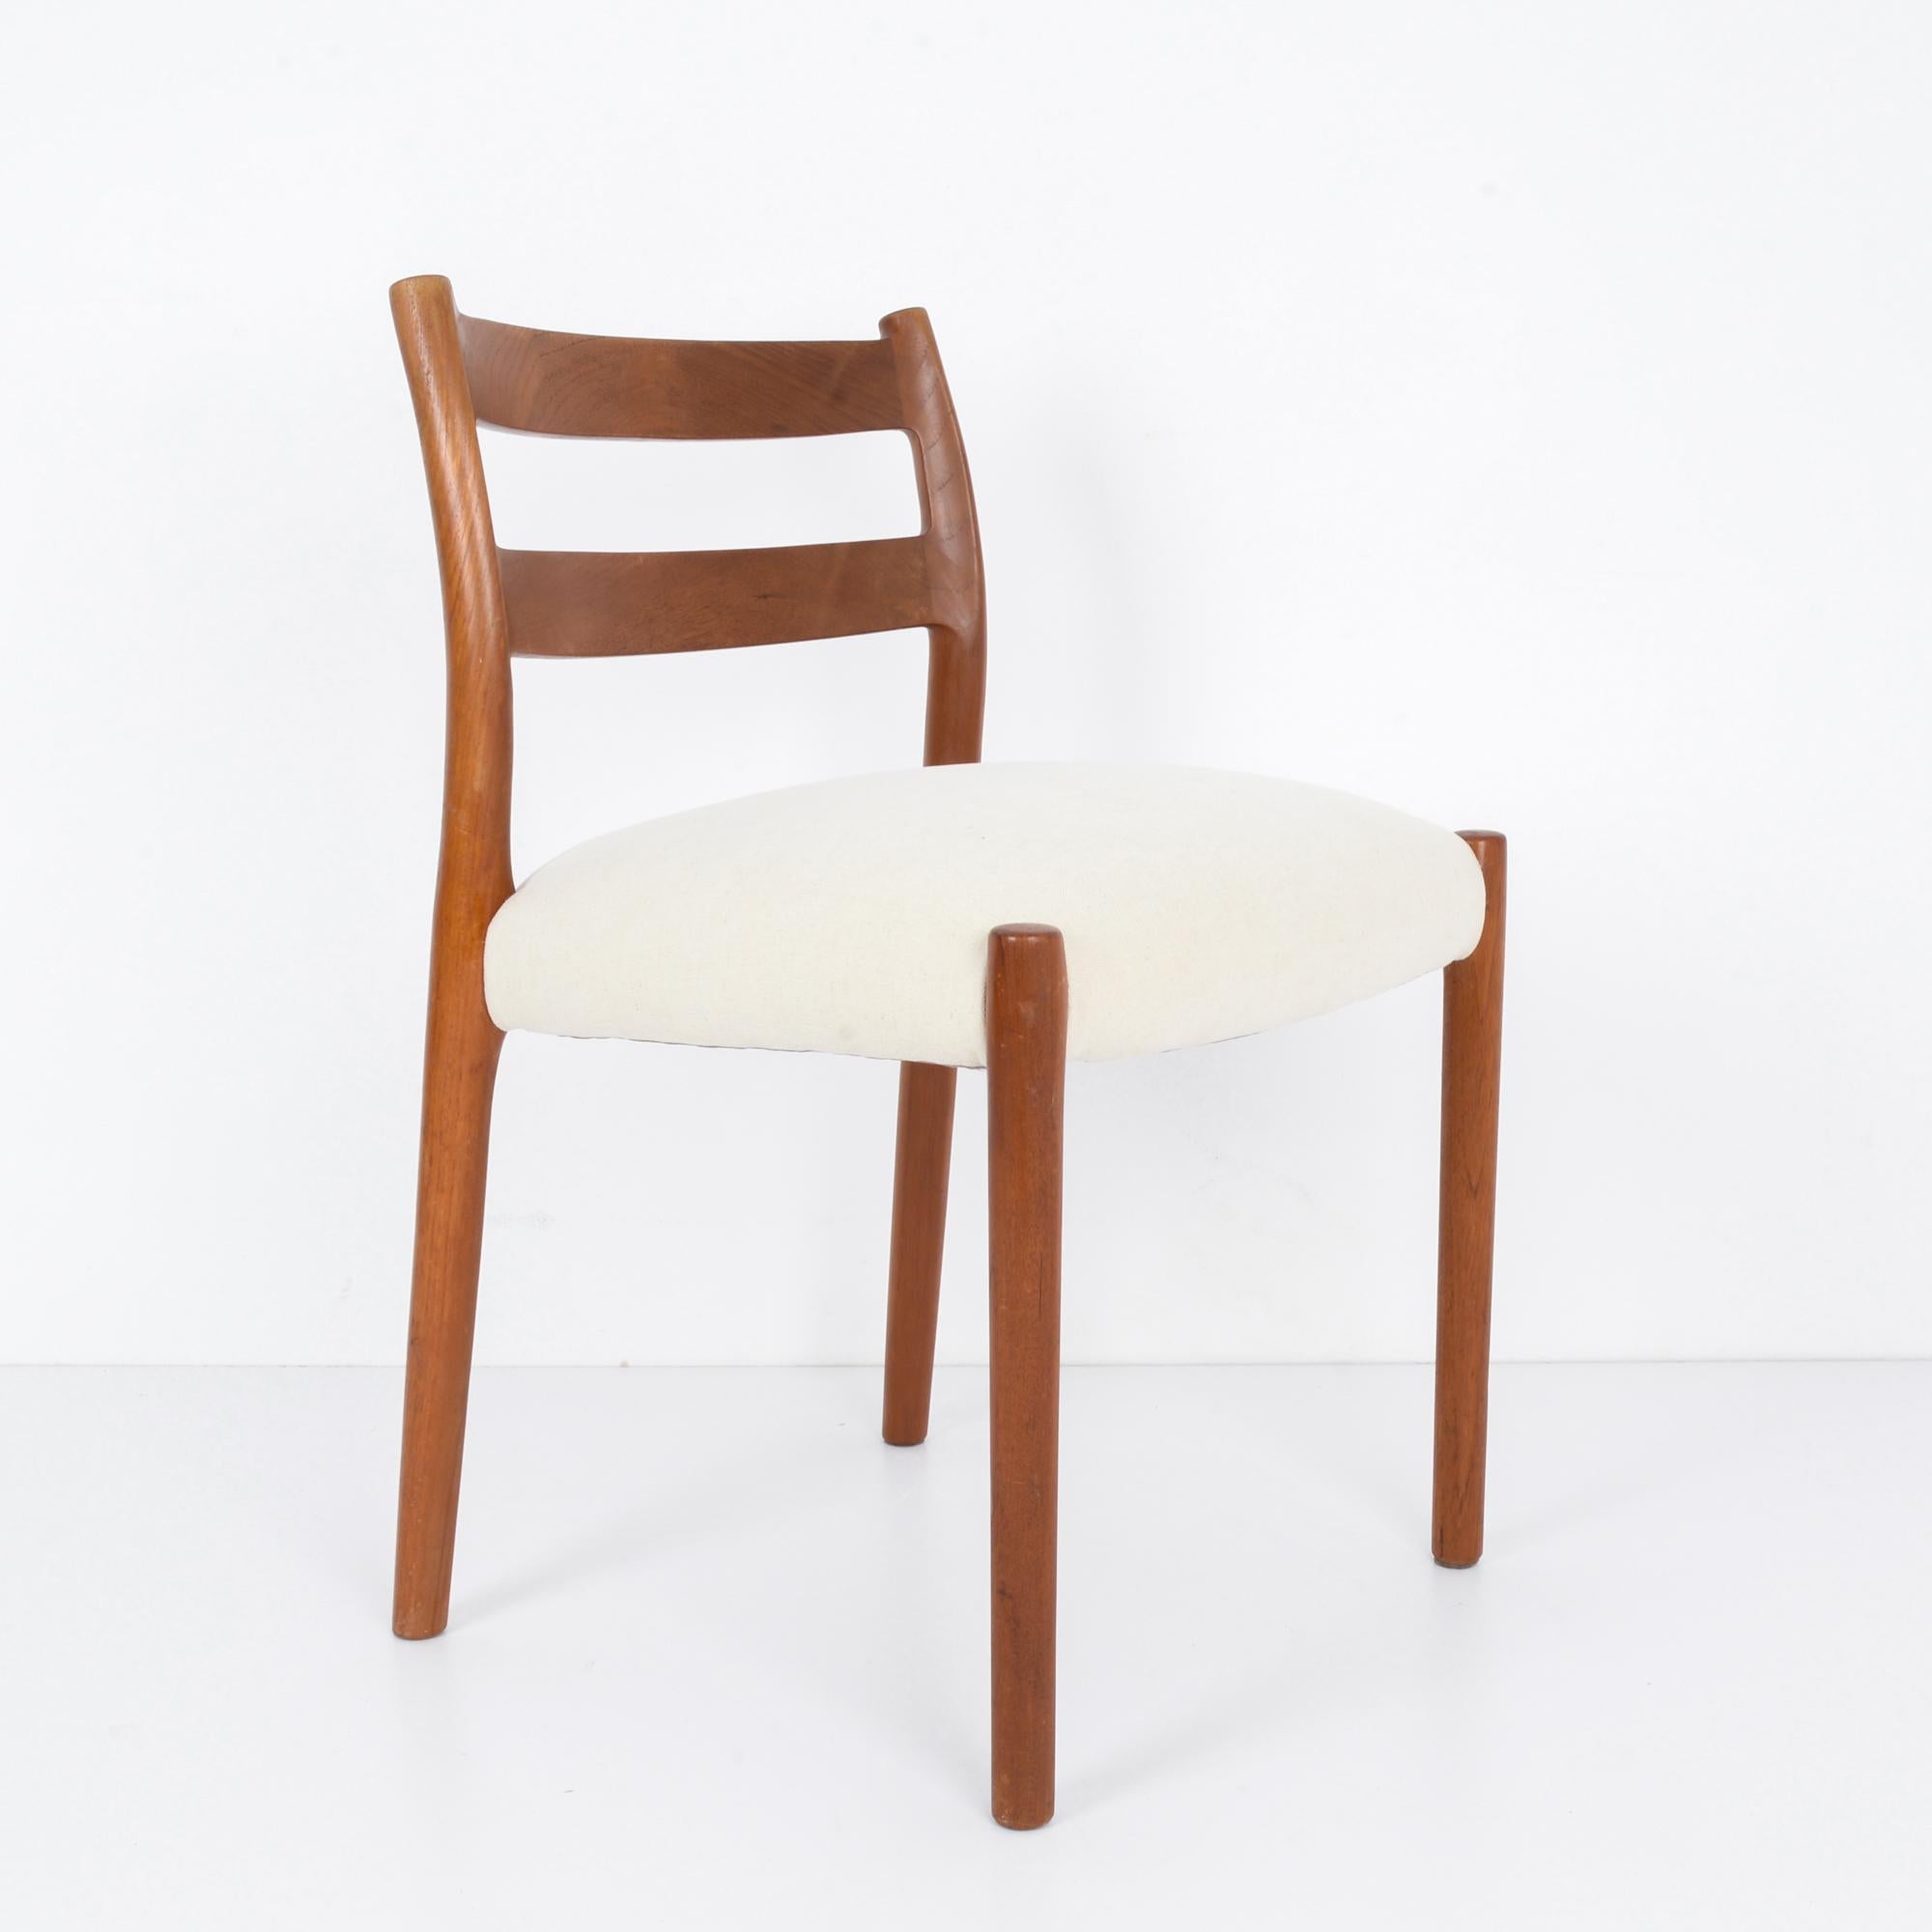 In the innovative design landscape of 1960s Denmark, this wooden chair with an upholstered seat epitomizes the sleek sophistication and ergonomic comfort of the era. Crafted with meticulous attention to detail, this piece represents the epitome of